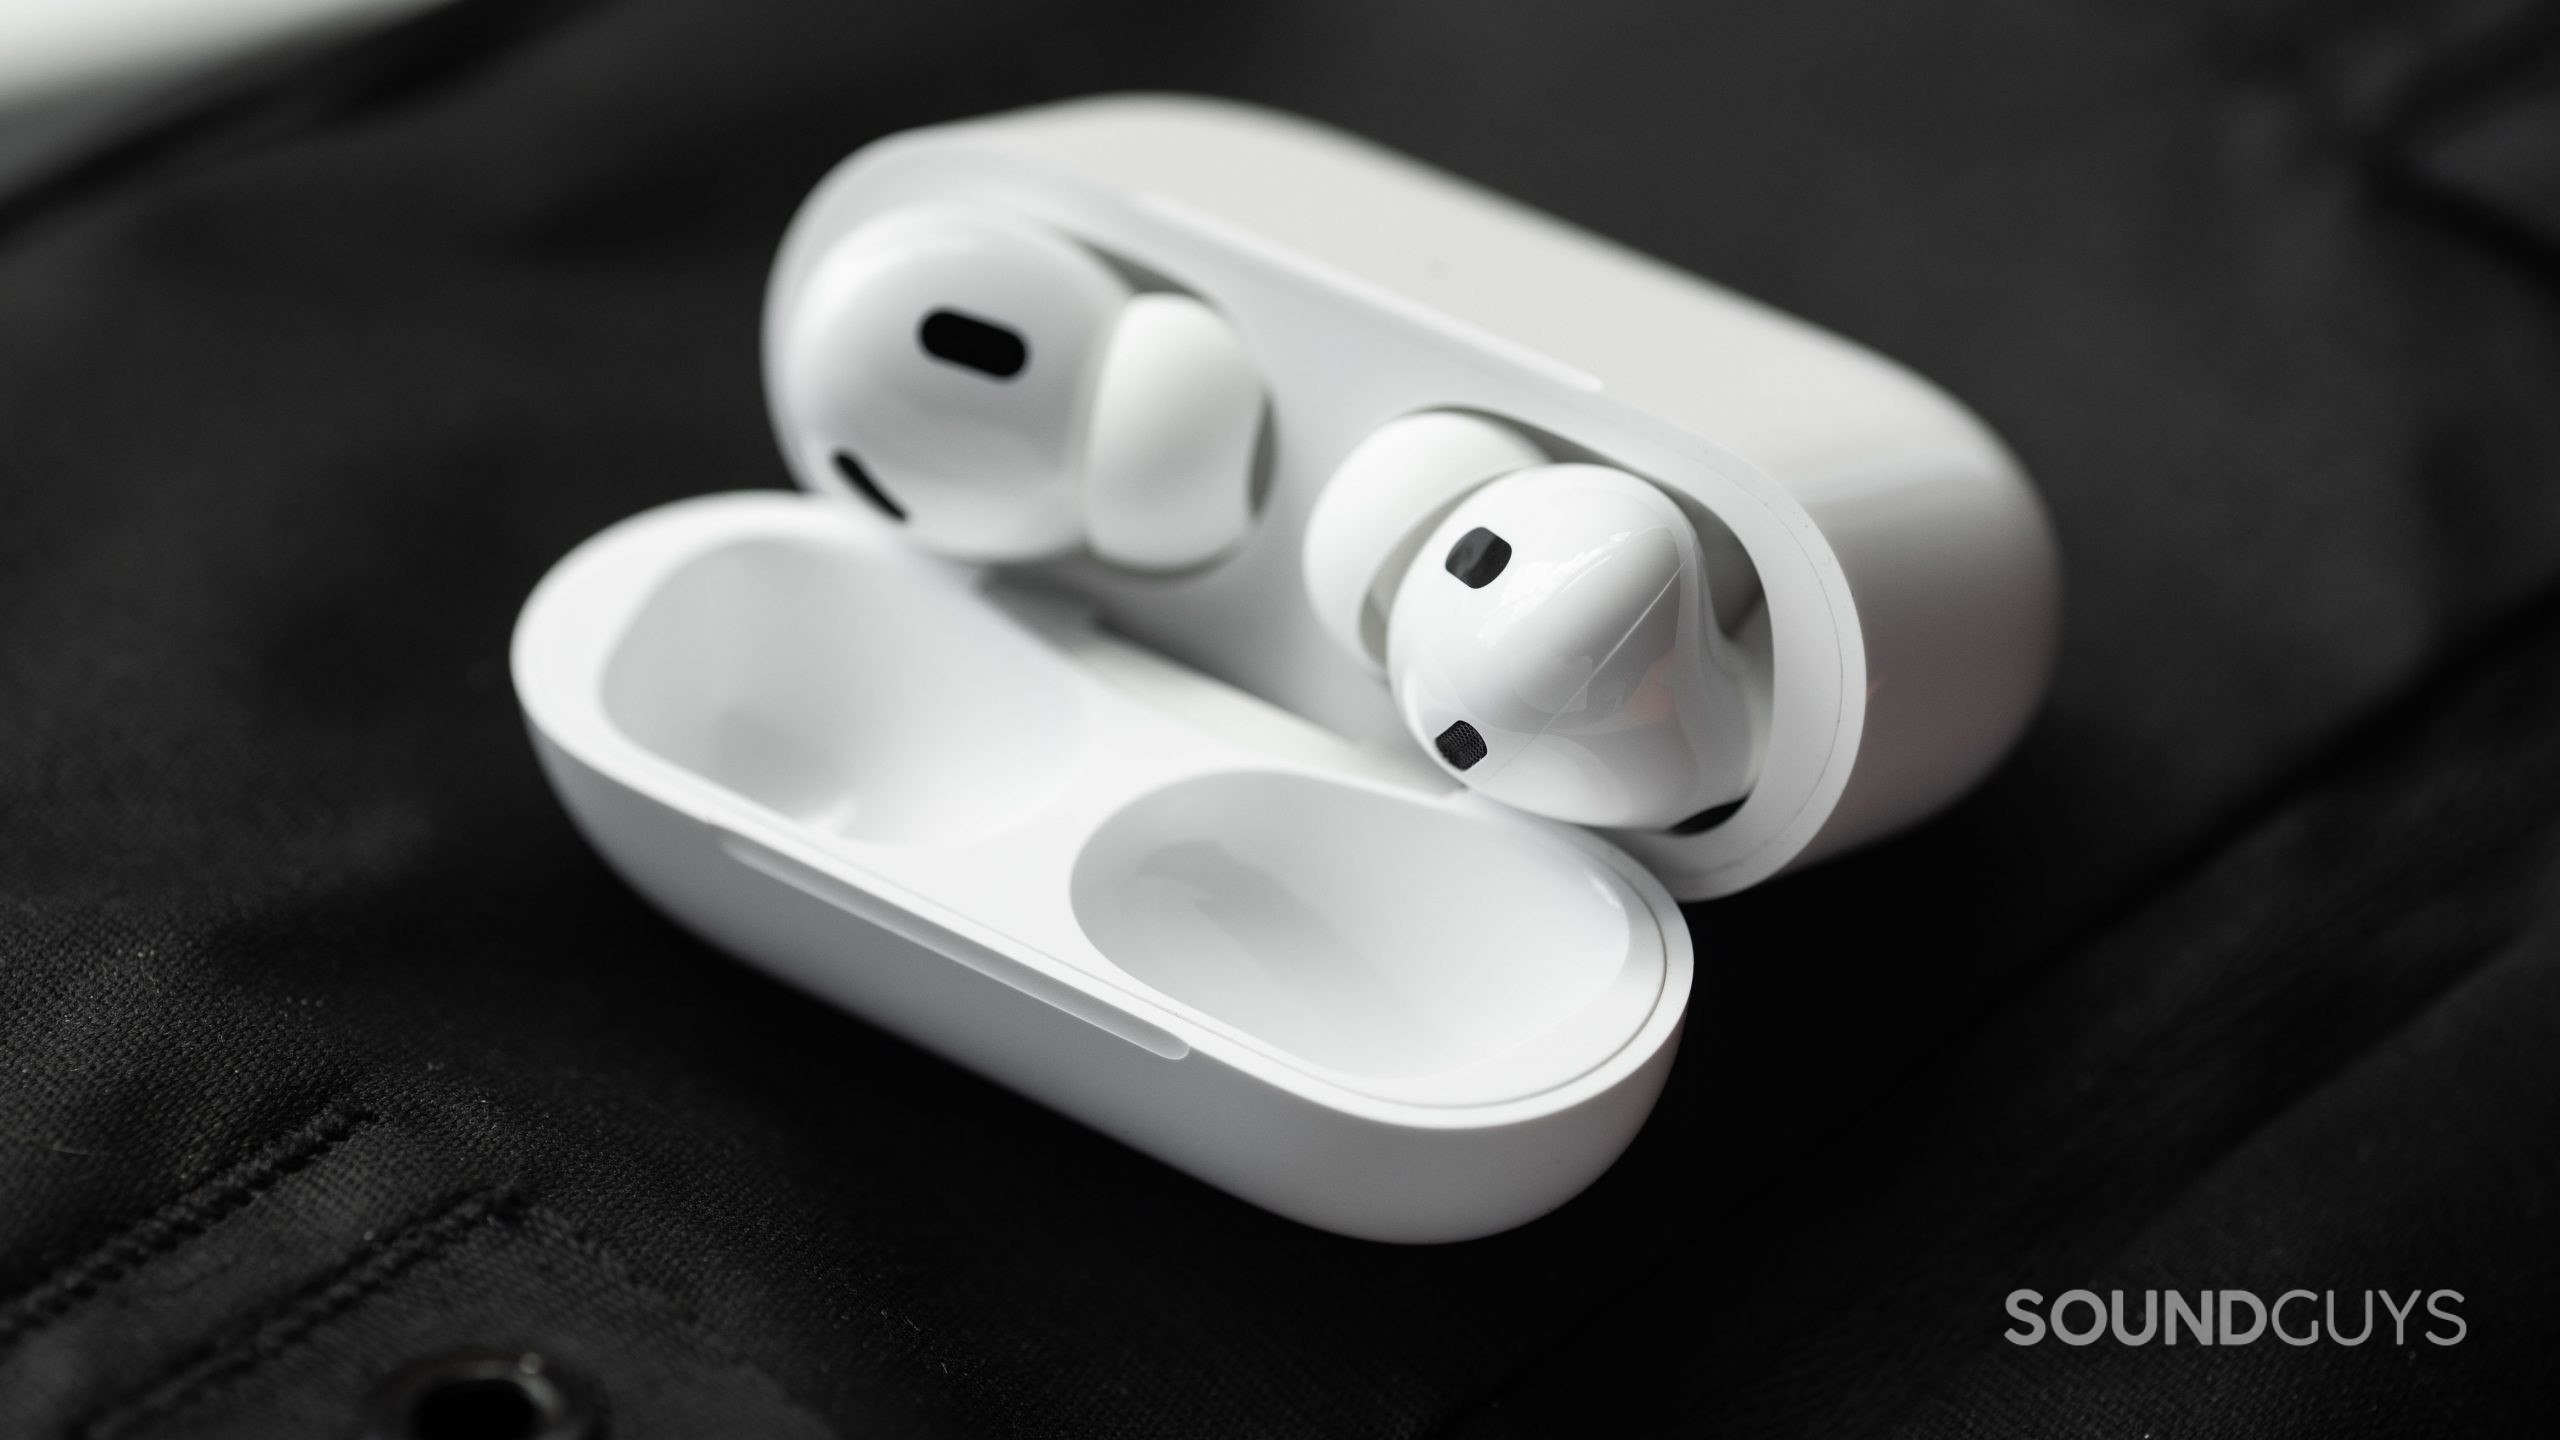 The Apple AirPods Pro (2nd generation) case is open and laying at an angle to show the earbuds and their sensors.